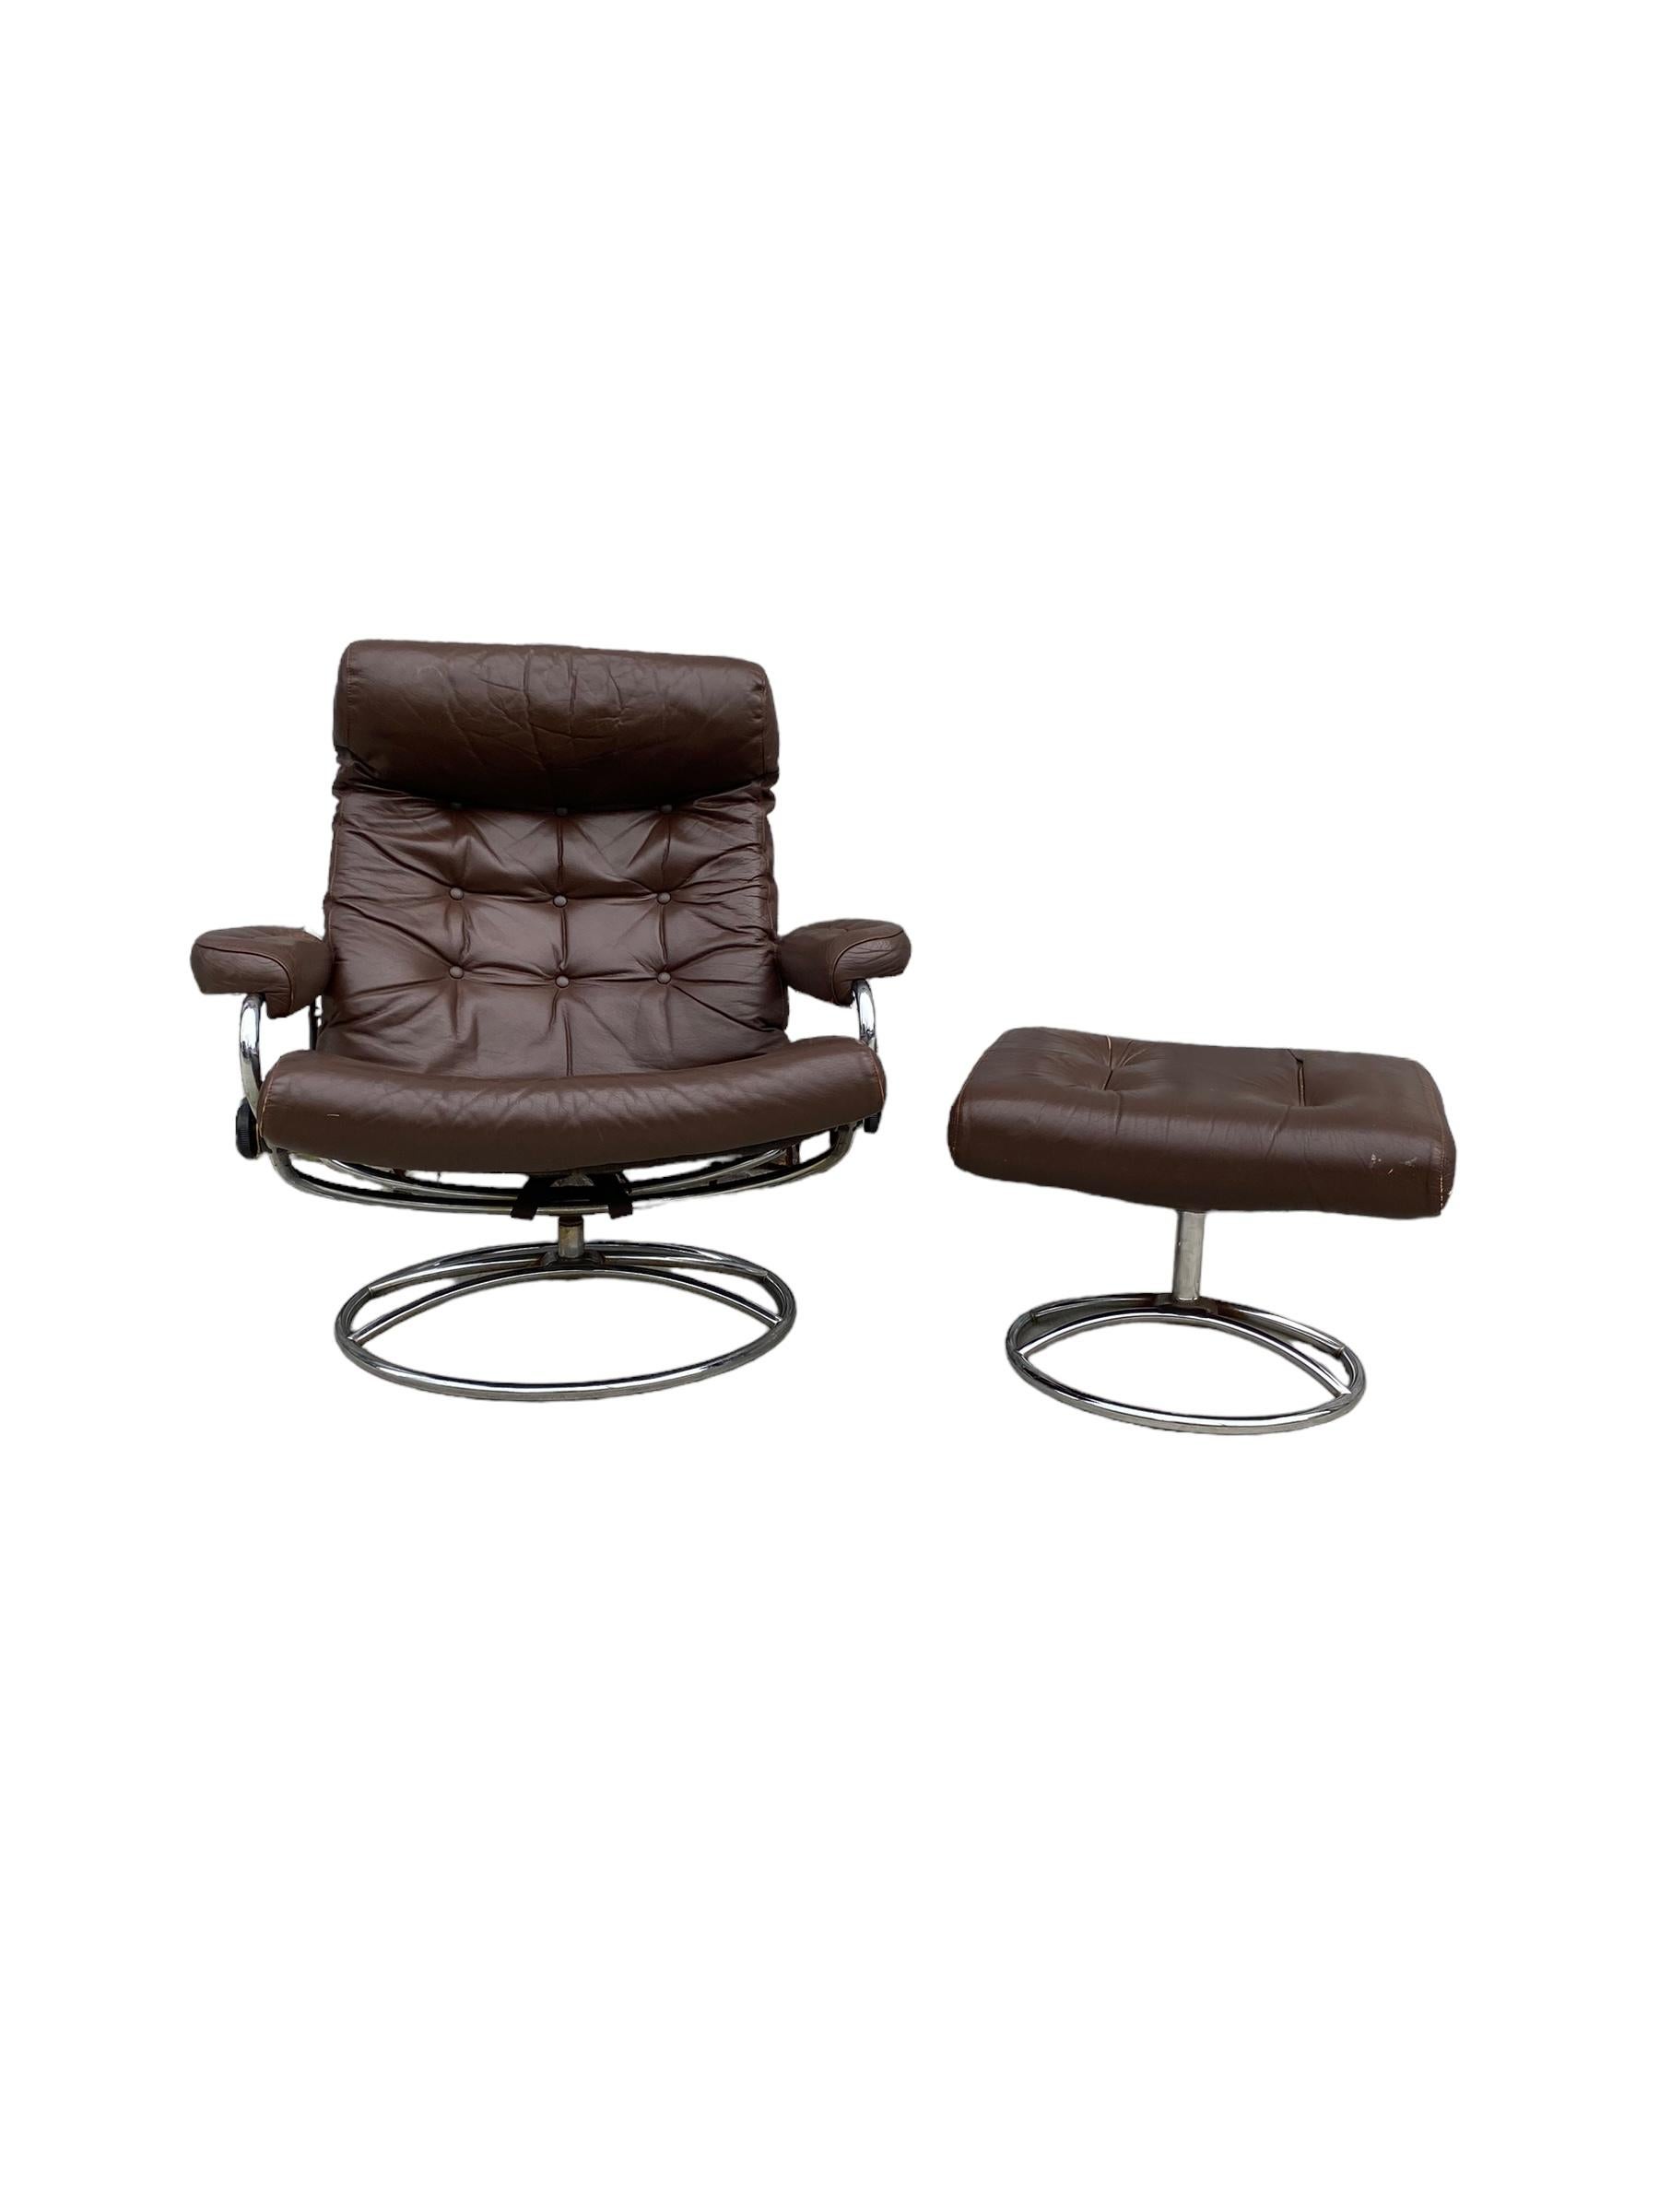 Ekornes Stressless Reclining Lounge Chair and Ottoman For Sale 4